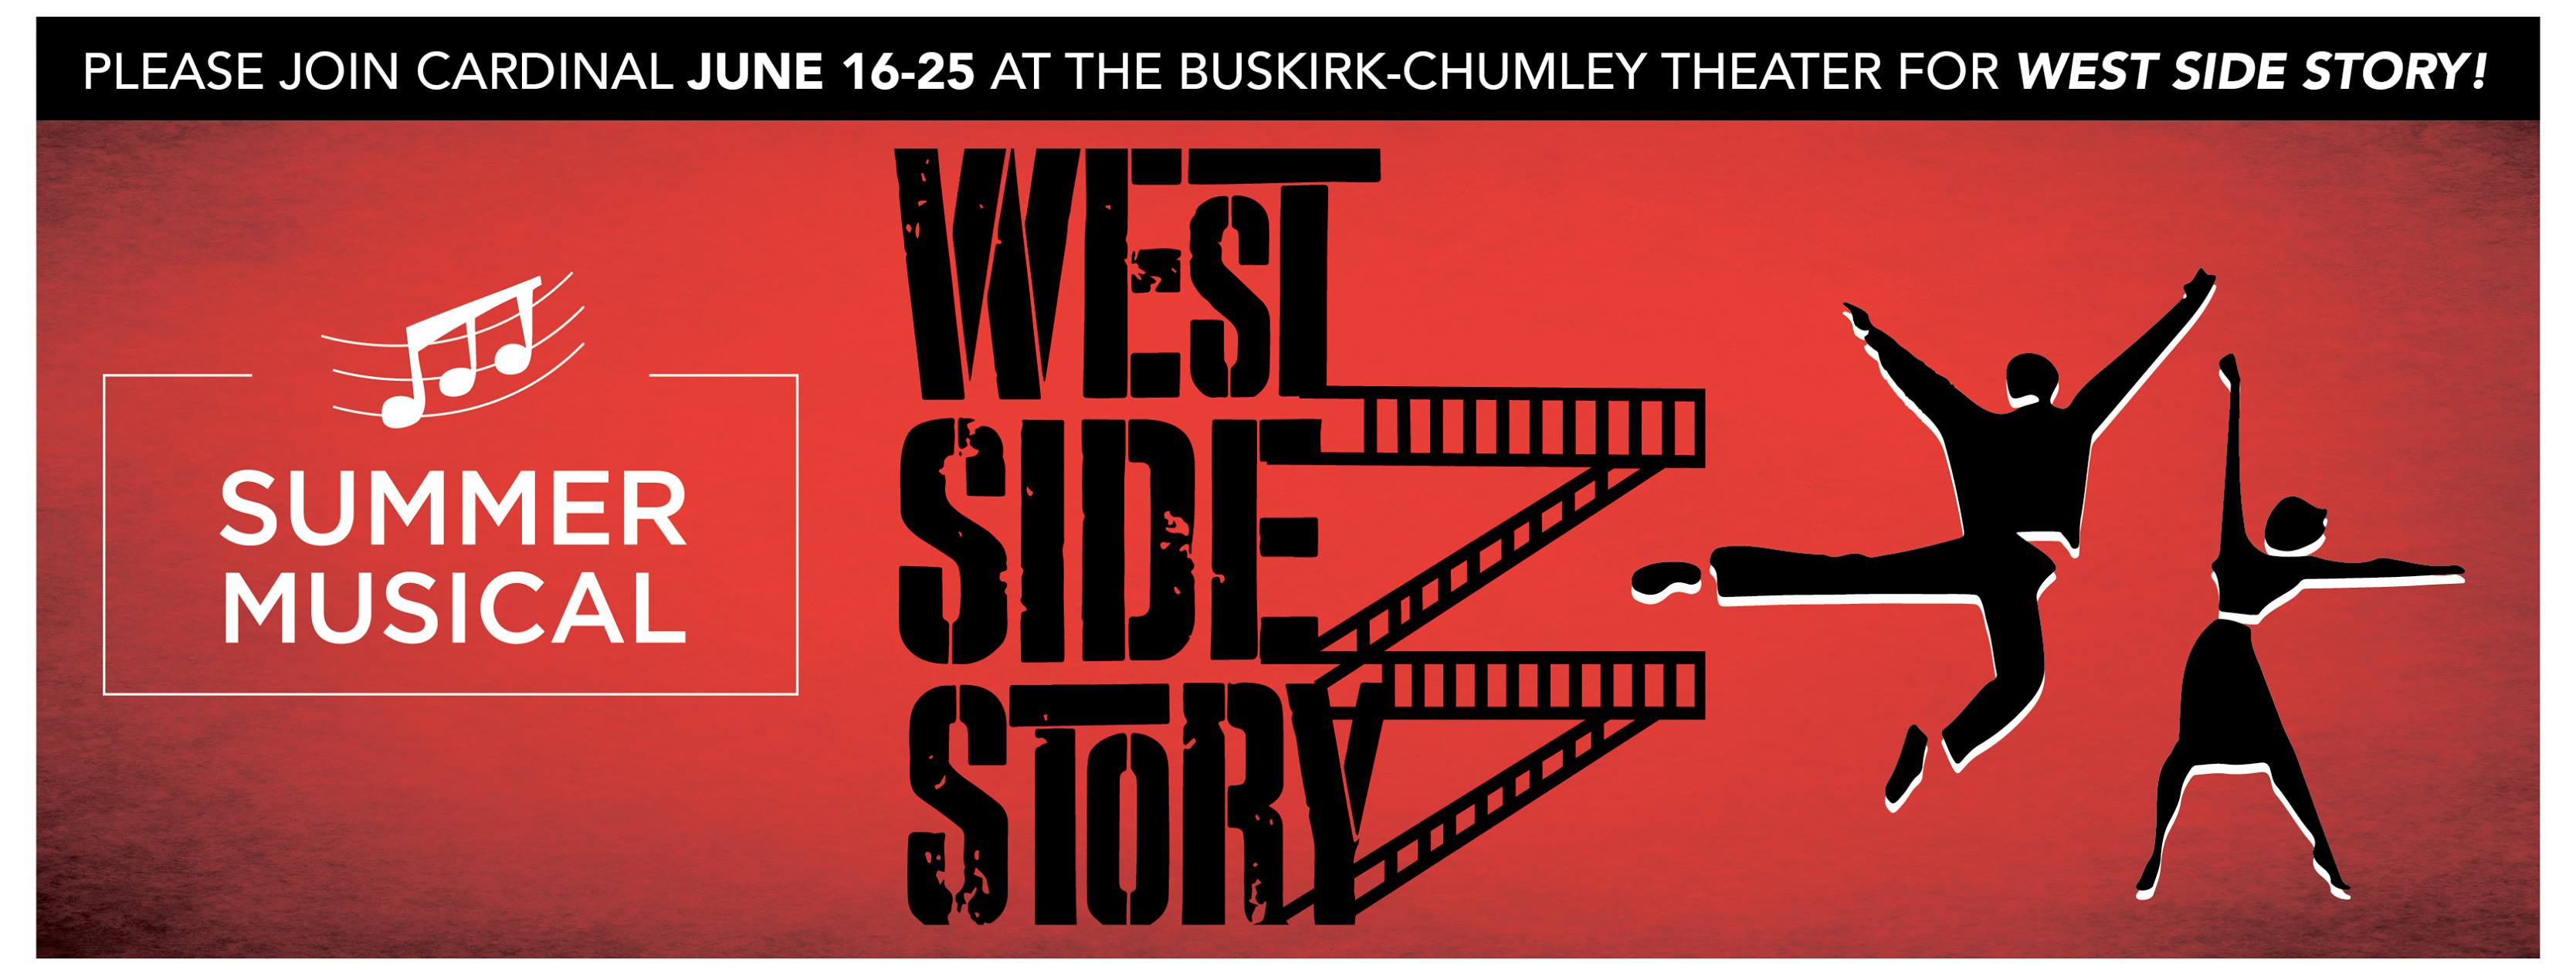 West Side Story Summer Musical